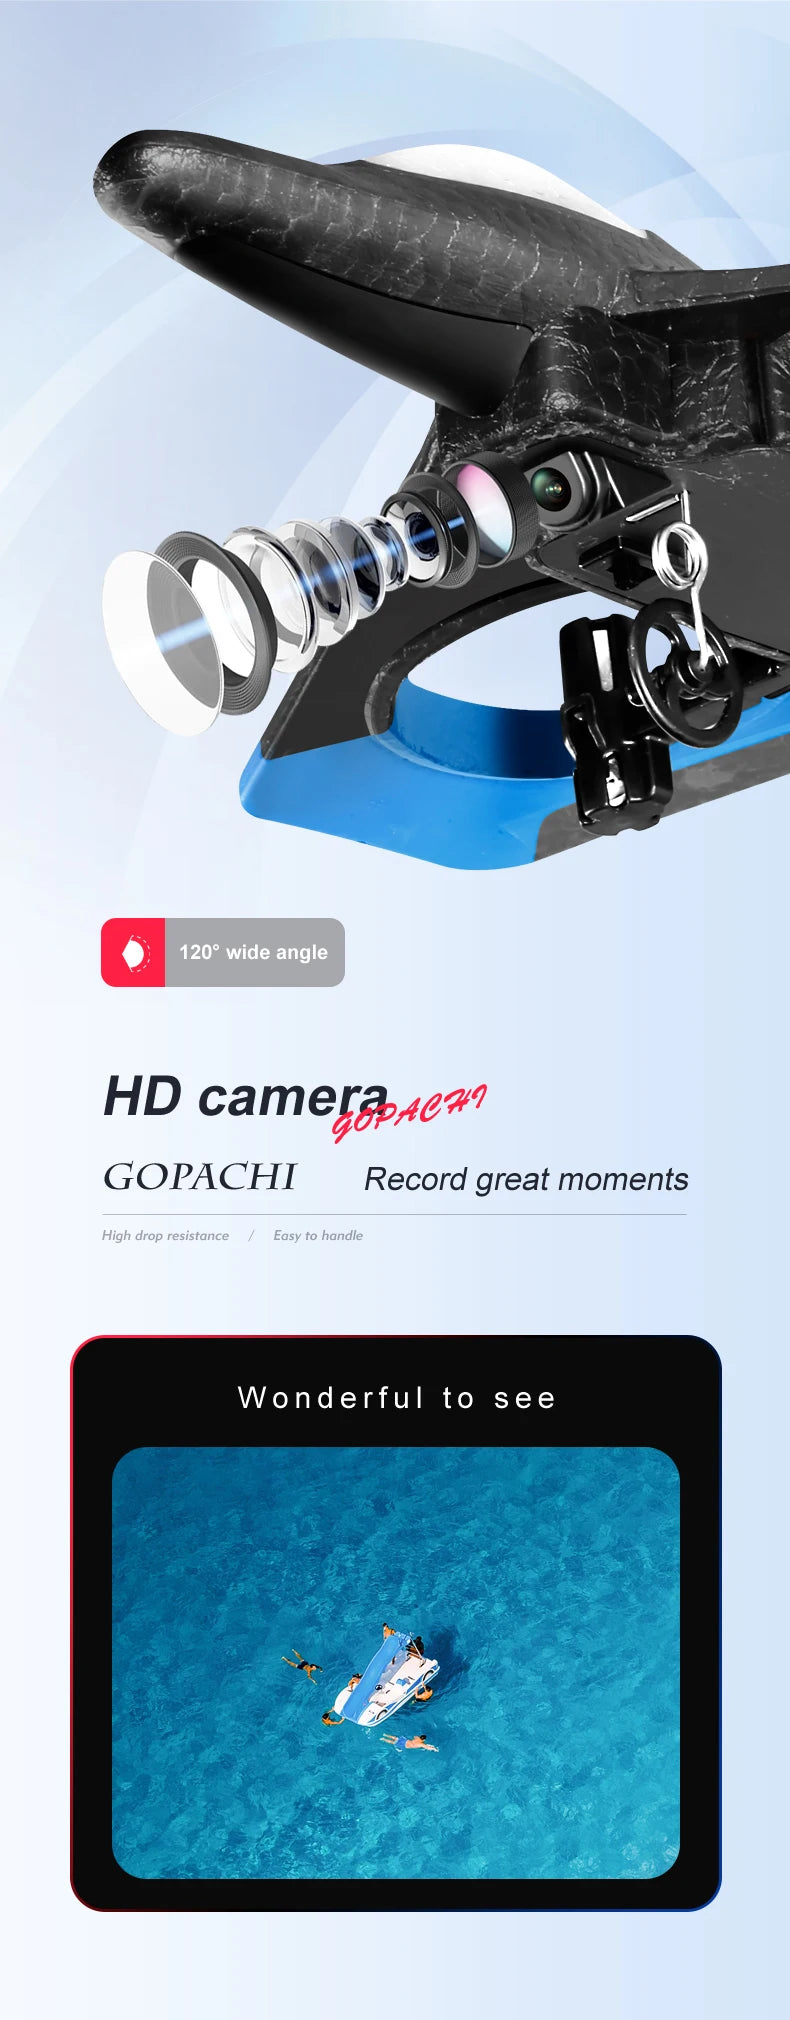 1209 wide angle HD cameraae?n GOPACHI Record great moments High drop resistance